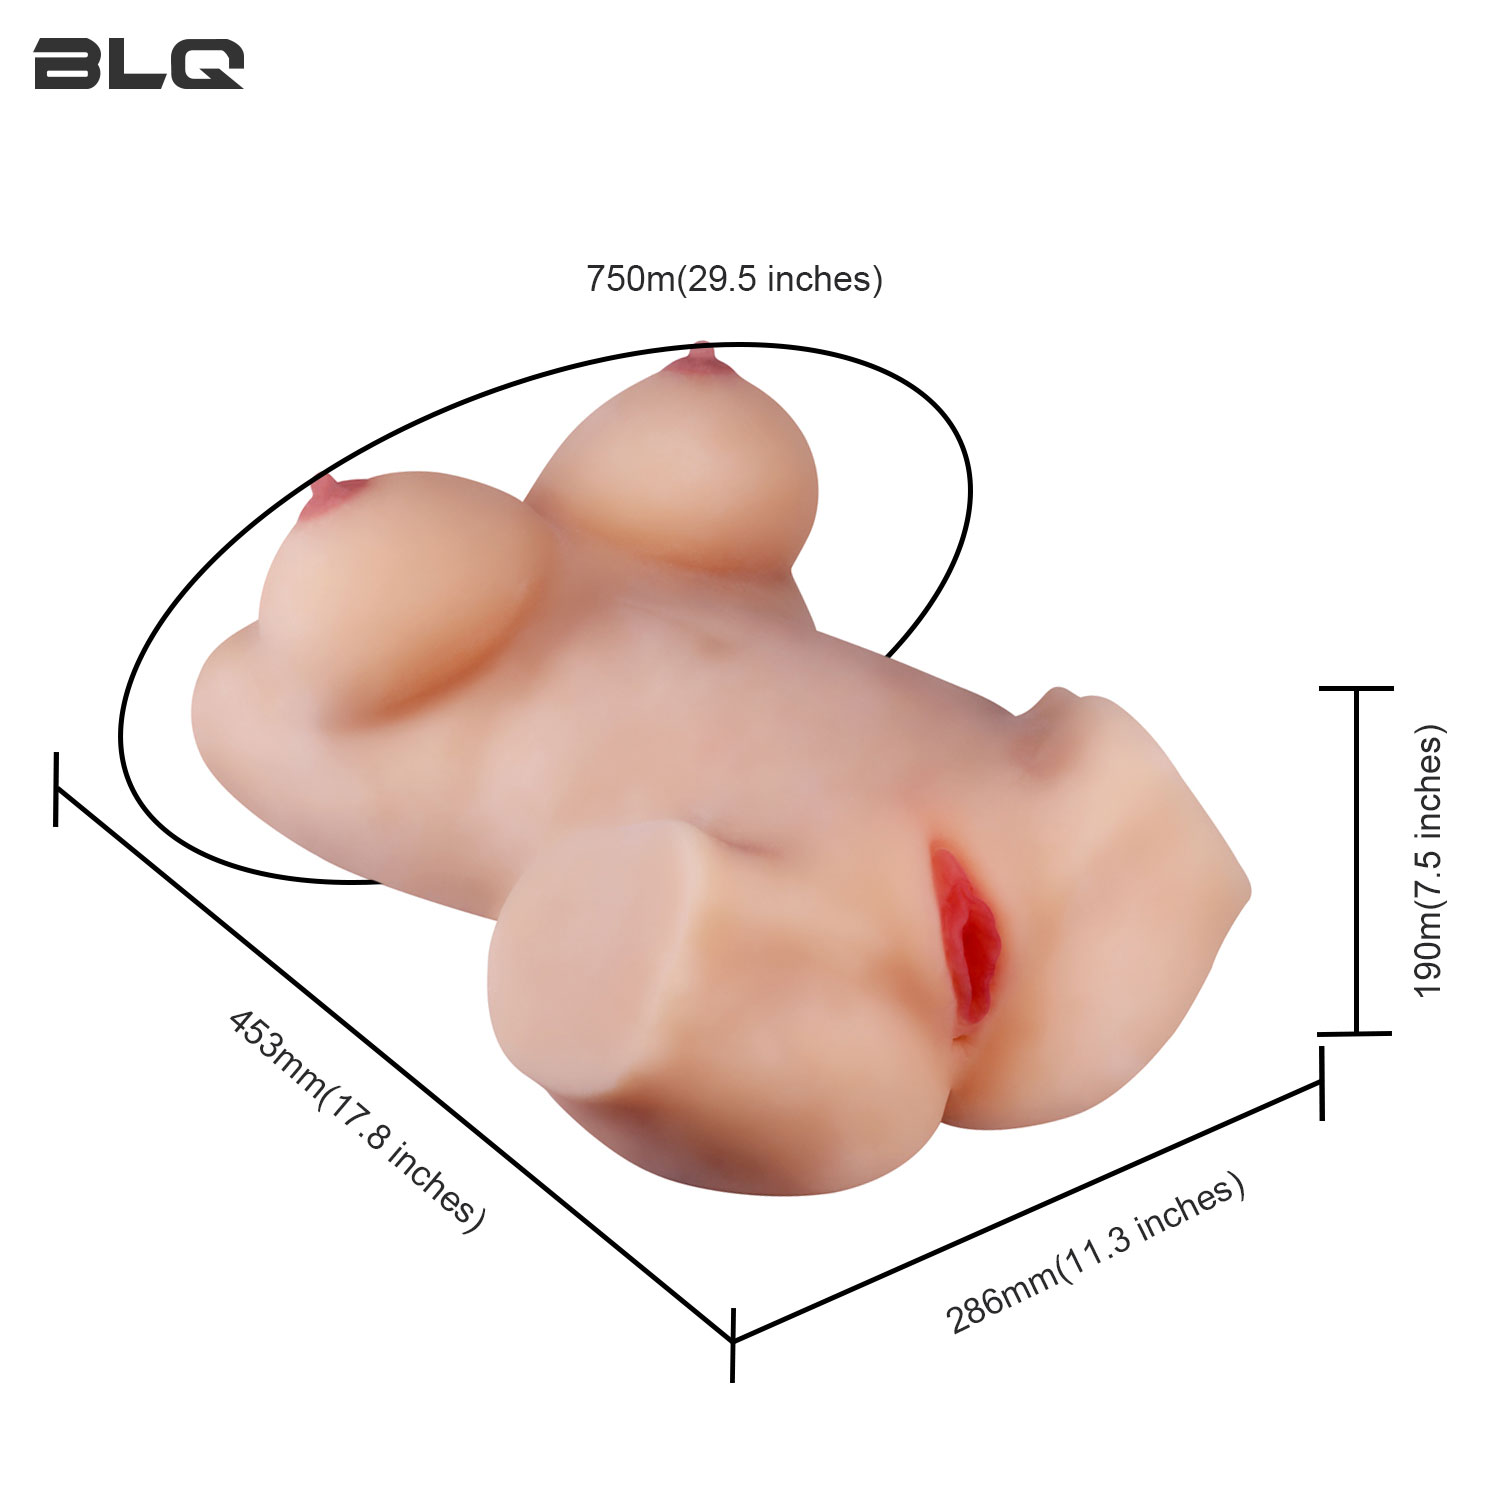 3 in 1 Male Masturbator With Anus Big-breasts And Realistic Internal 3D Vagina